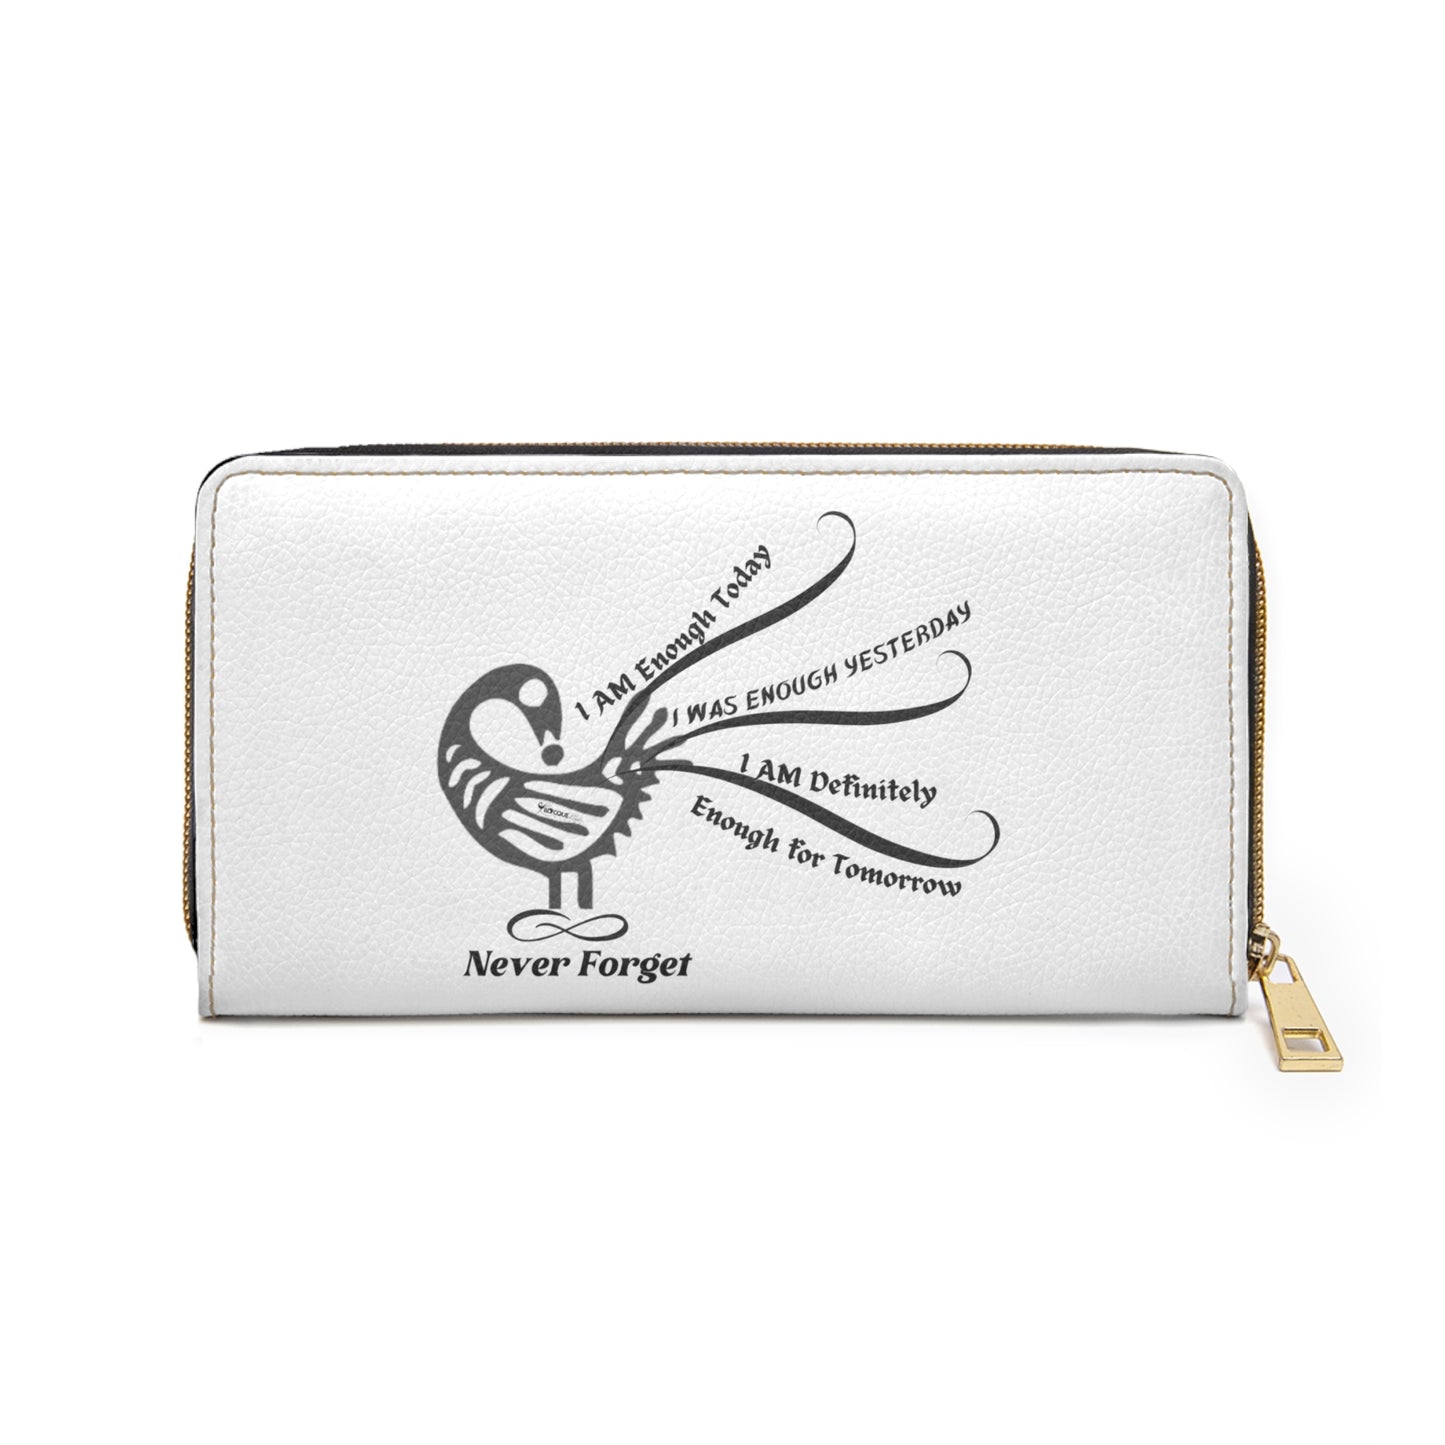 I AM More Than Enough- Positive Afrocentric Affirmation Vegan Leather Wallet Bag- Empower Your Style and Self-Love ; White Wallet